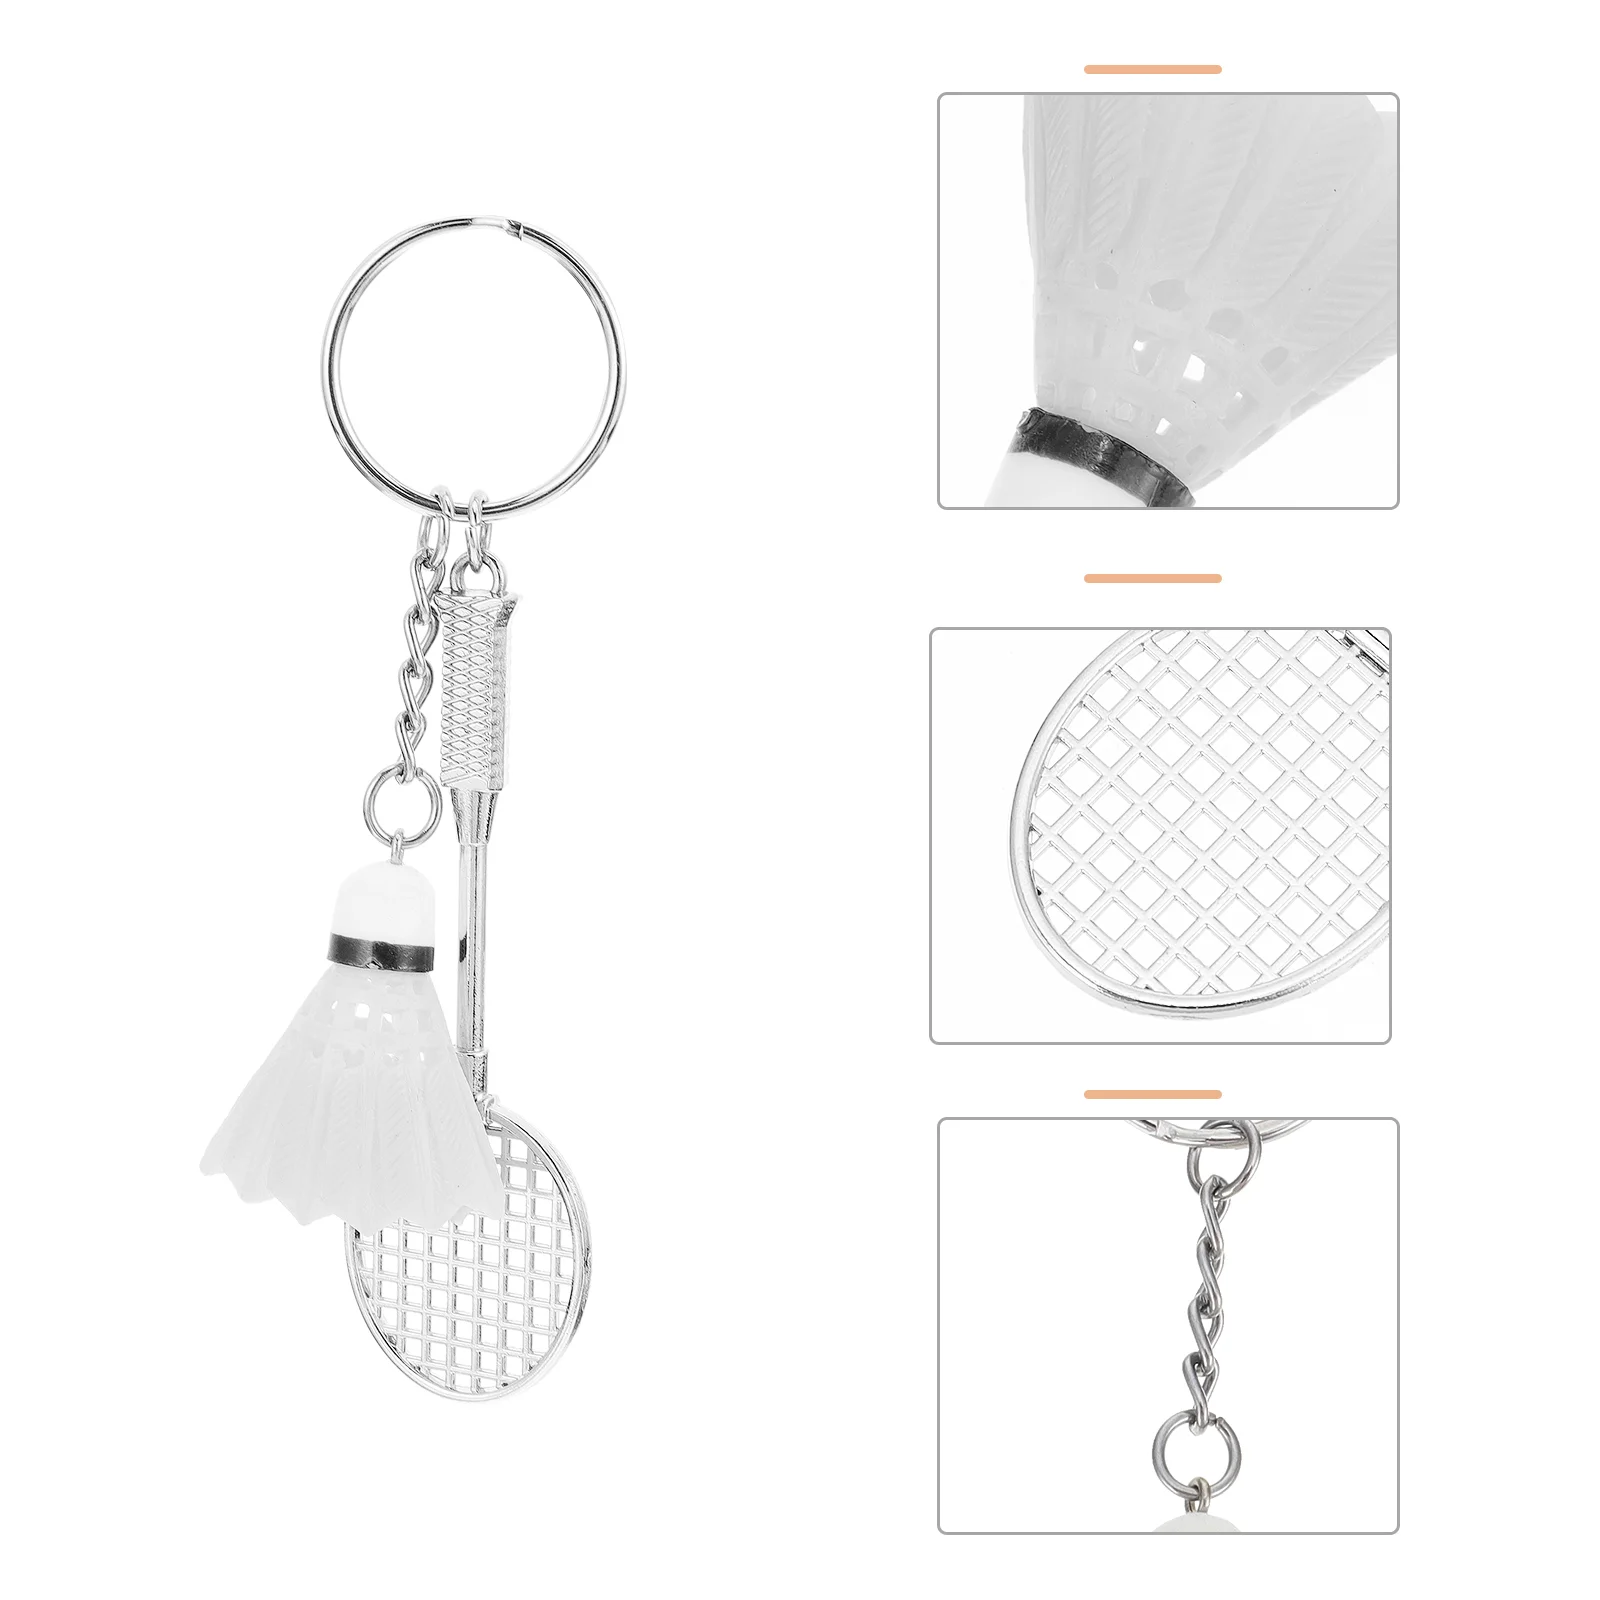 2pcs Badminton Keychain and Racket Keychain Funny Key Ring Sports Souvenirs Gift for Themed Party Favor 24pcs cardboard jewelry set box for packaging ring necklace party wedding favor rectangle paper gift boxs tan 8x5x2 5cm